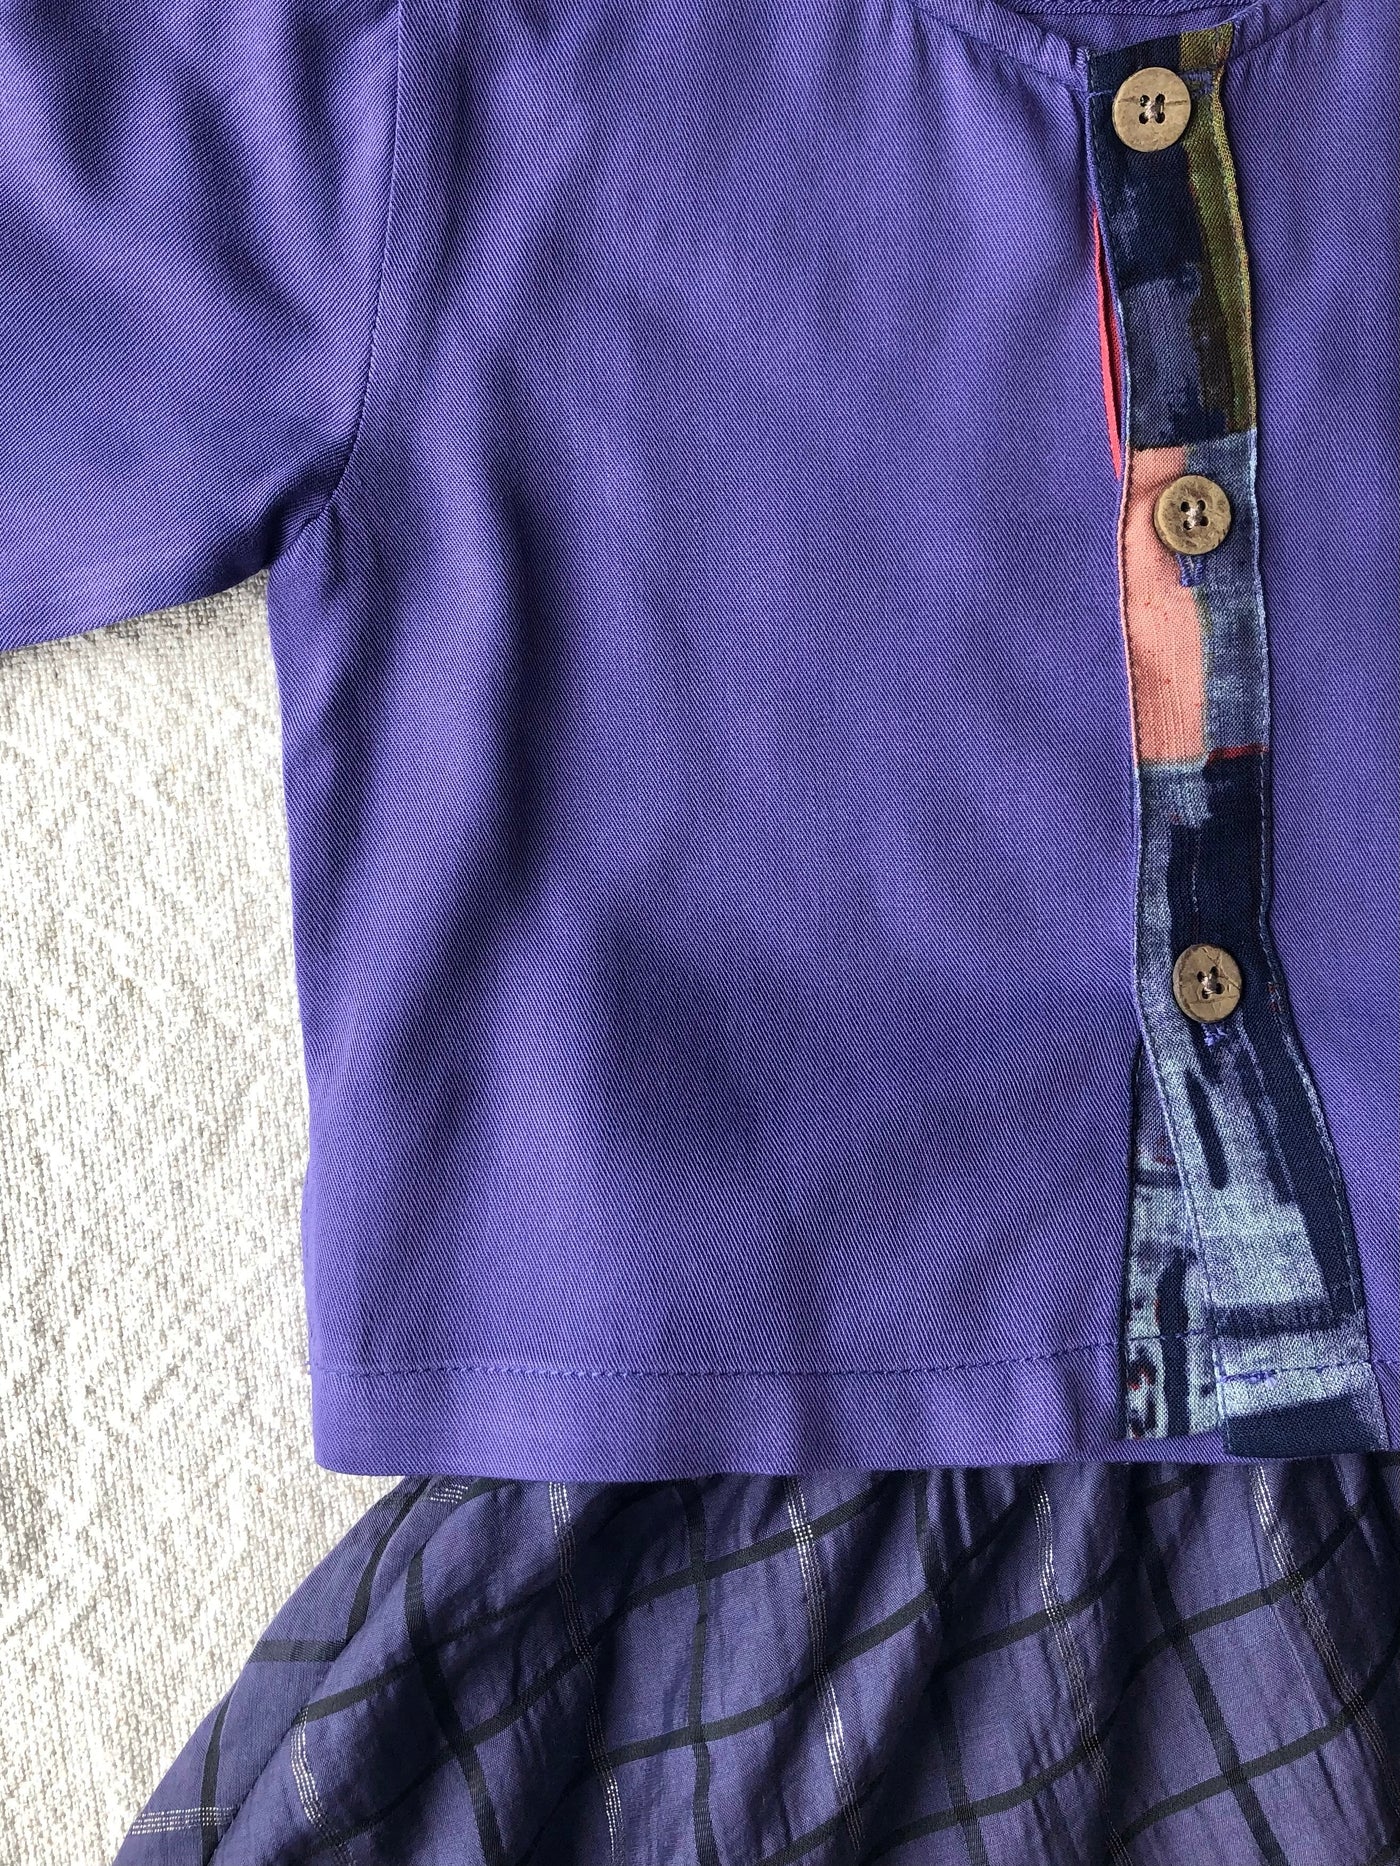 TARI Baby's Blouse with Flared Skirt Set in Purple